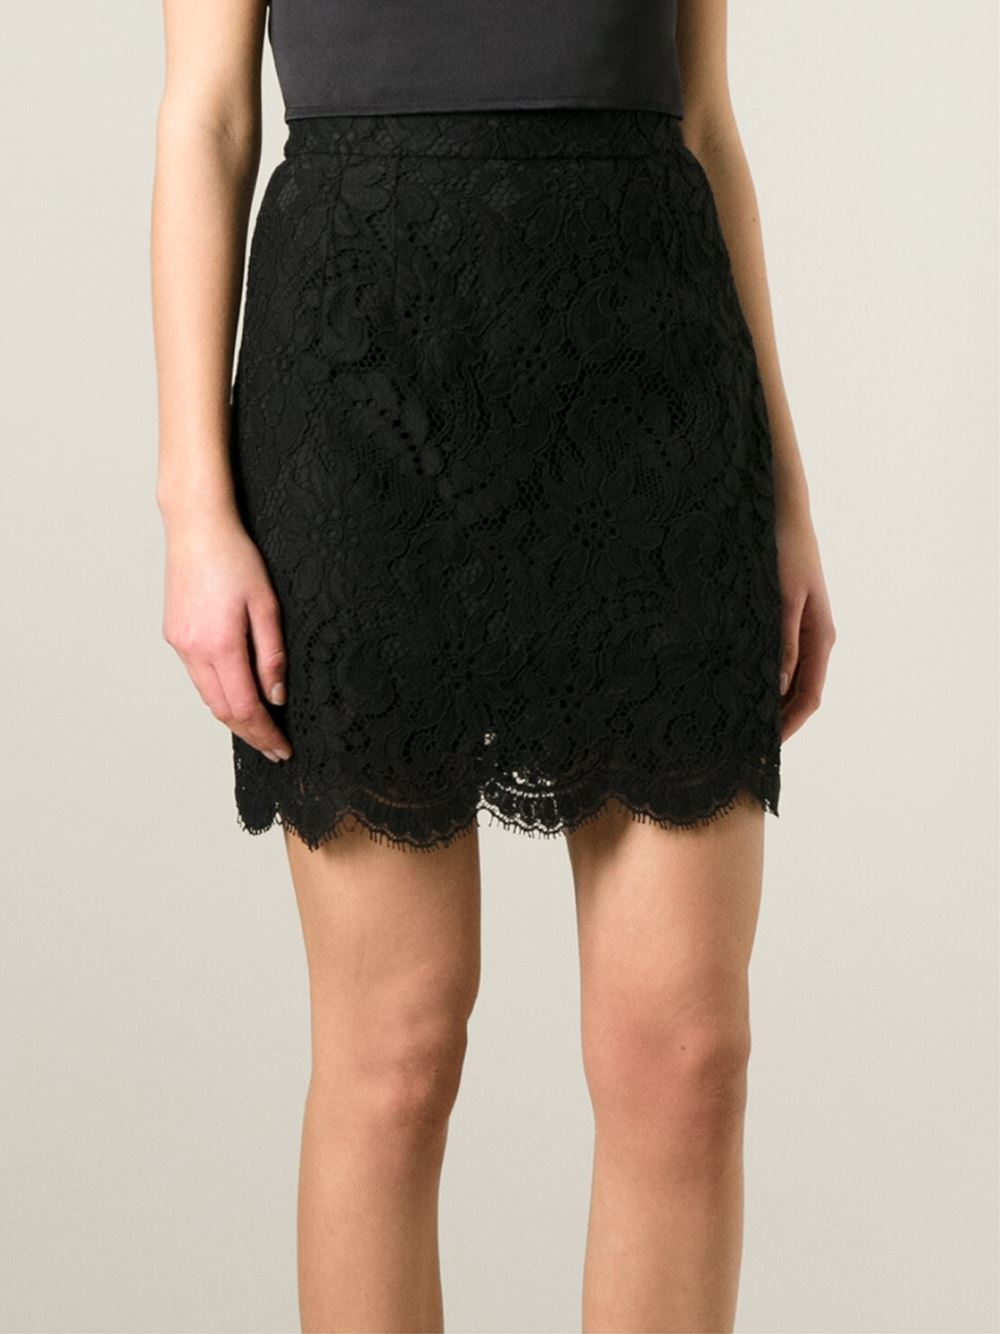 Lyst - Dolce & Gabbana Floral Lace Skirt in Black